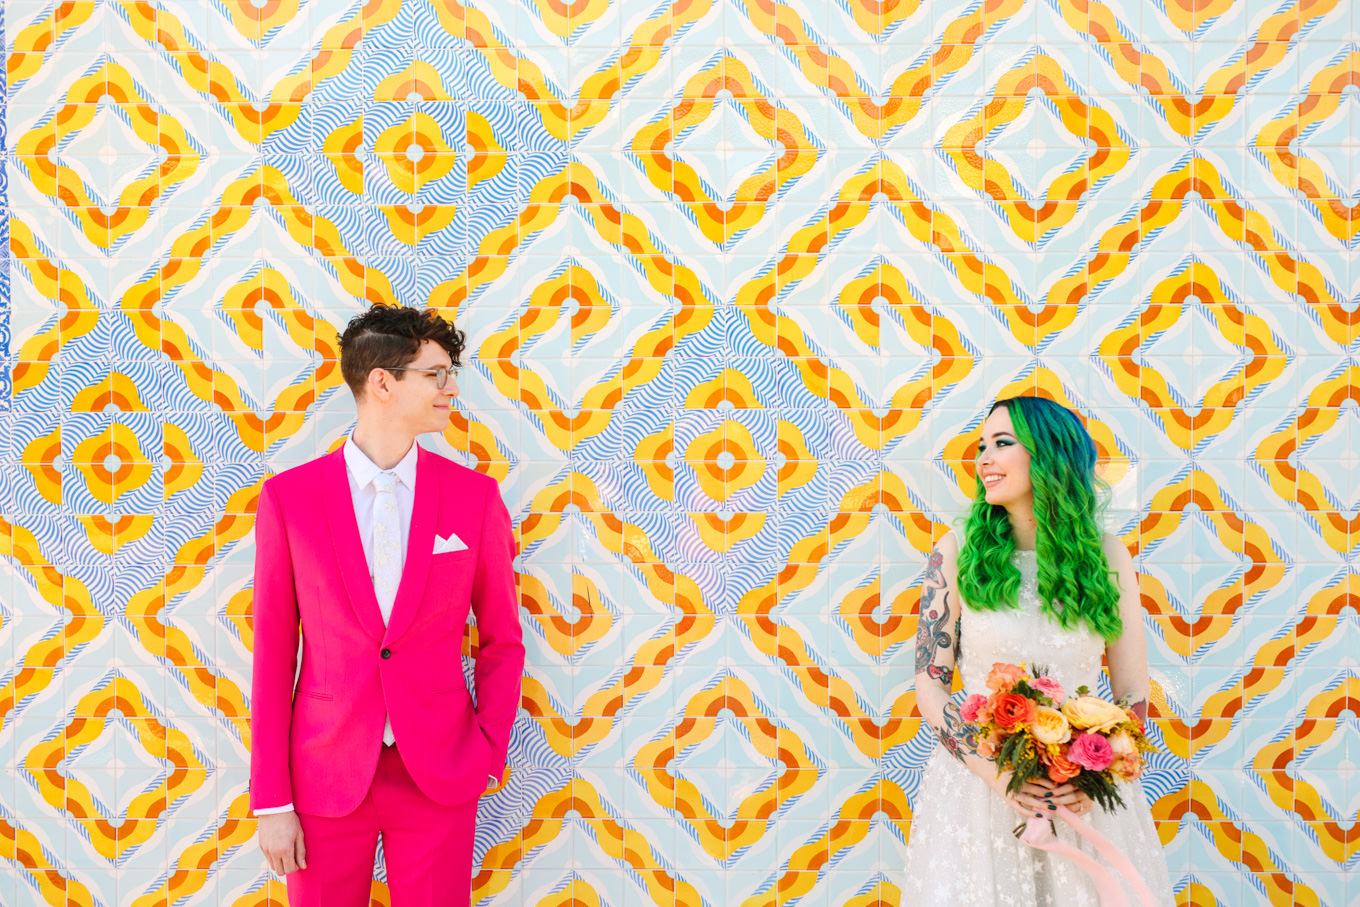 Bride with green hair and groom with hot pink suit | Colorful wedding at The Unique Space Los Angeles published in The Knot Magazine | Fresh and colorful photography for fun-loving couples in Southern California | #colorfulwedding #losangeleswedding #weddingphotography #uniquespace Source: Mary Costa Photography | Los Angeles